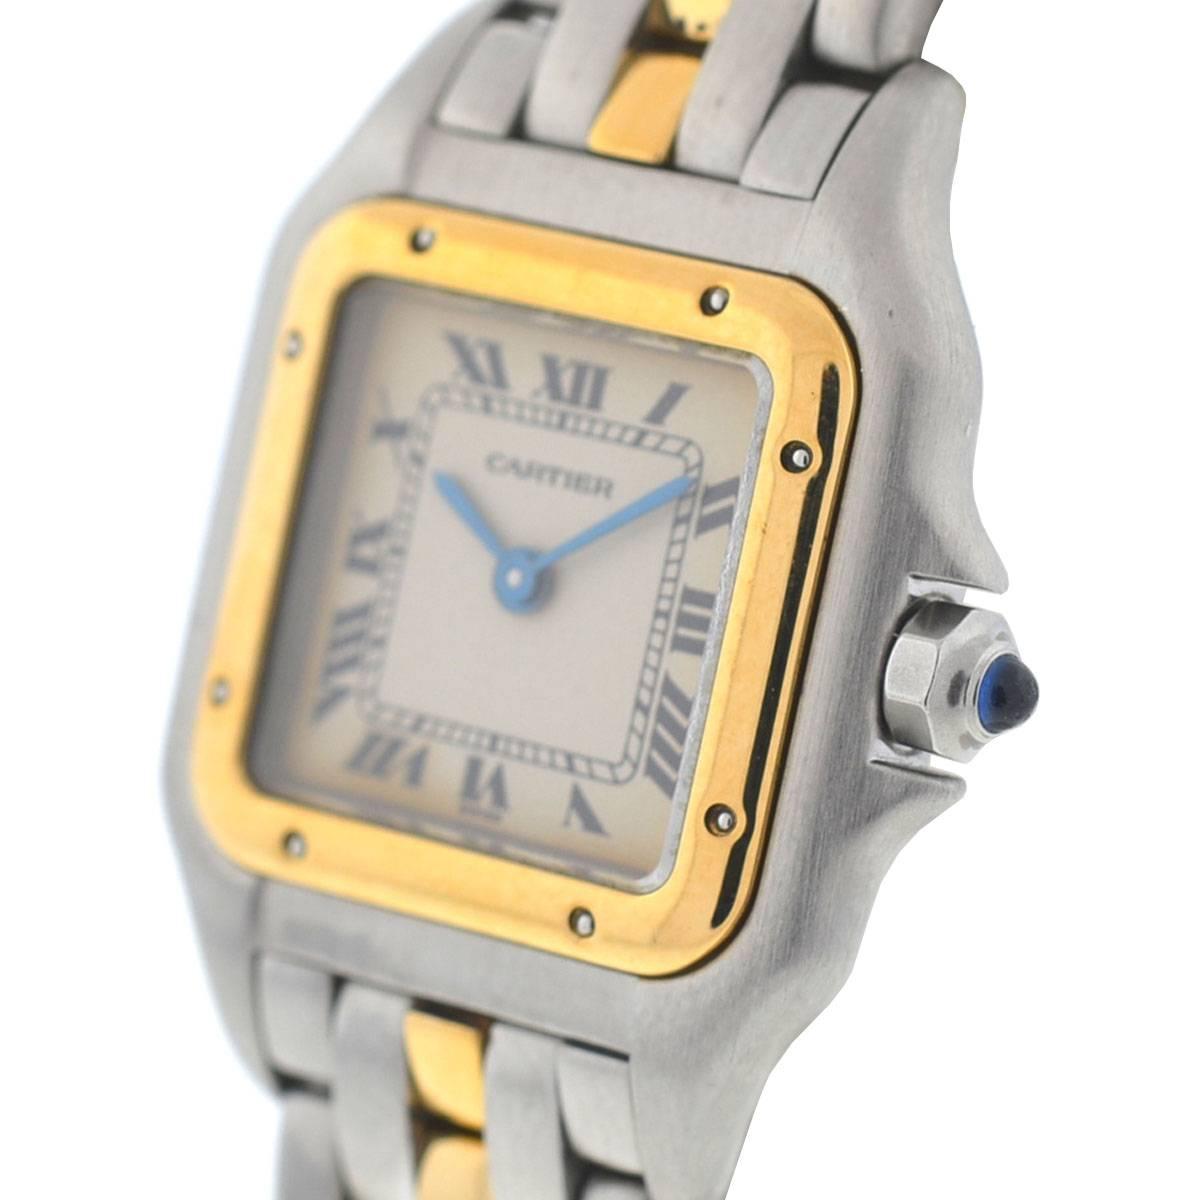 Company - Cartier
Style - Dress/Formal
Model - Panthere
Reference Number - 166921
Case Metal - Stainless Steel
Case Measurement - 21 mm 
Bracelet - 18k Yellow Gold (Single Row) Stainless Steel - Fits a 6" wrist
Dial - White
Bezel - 18k Yellow